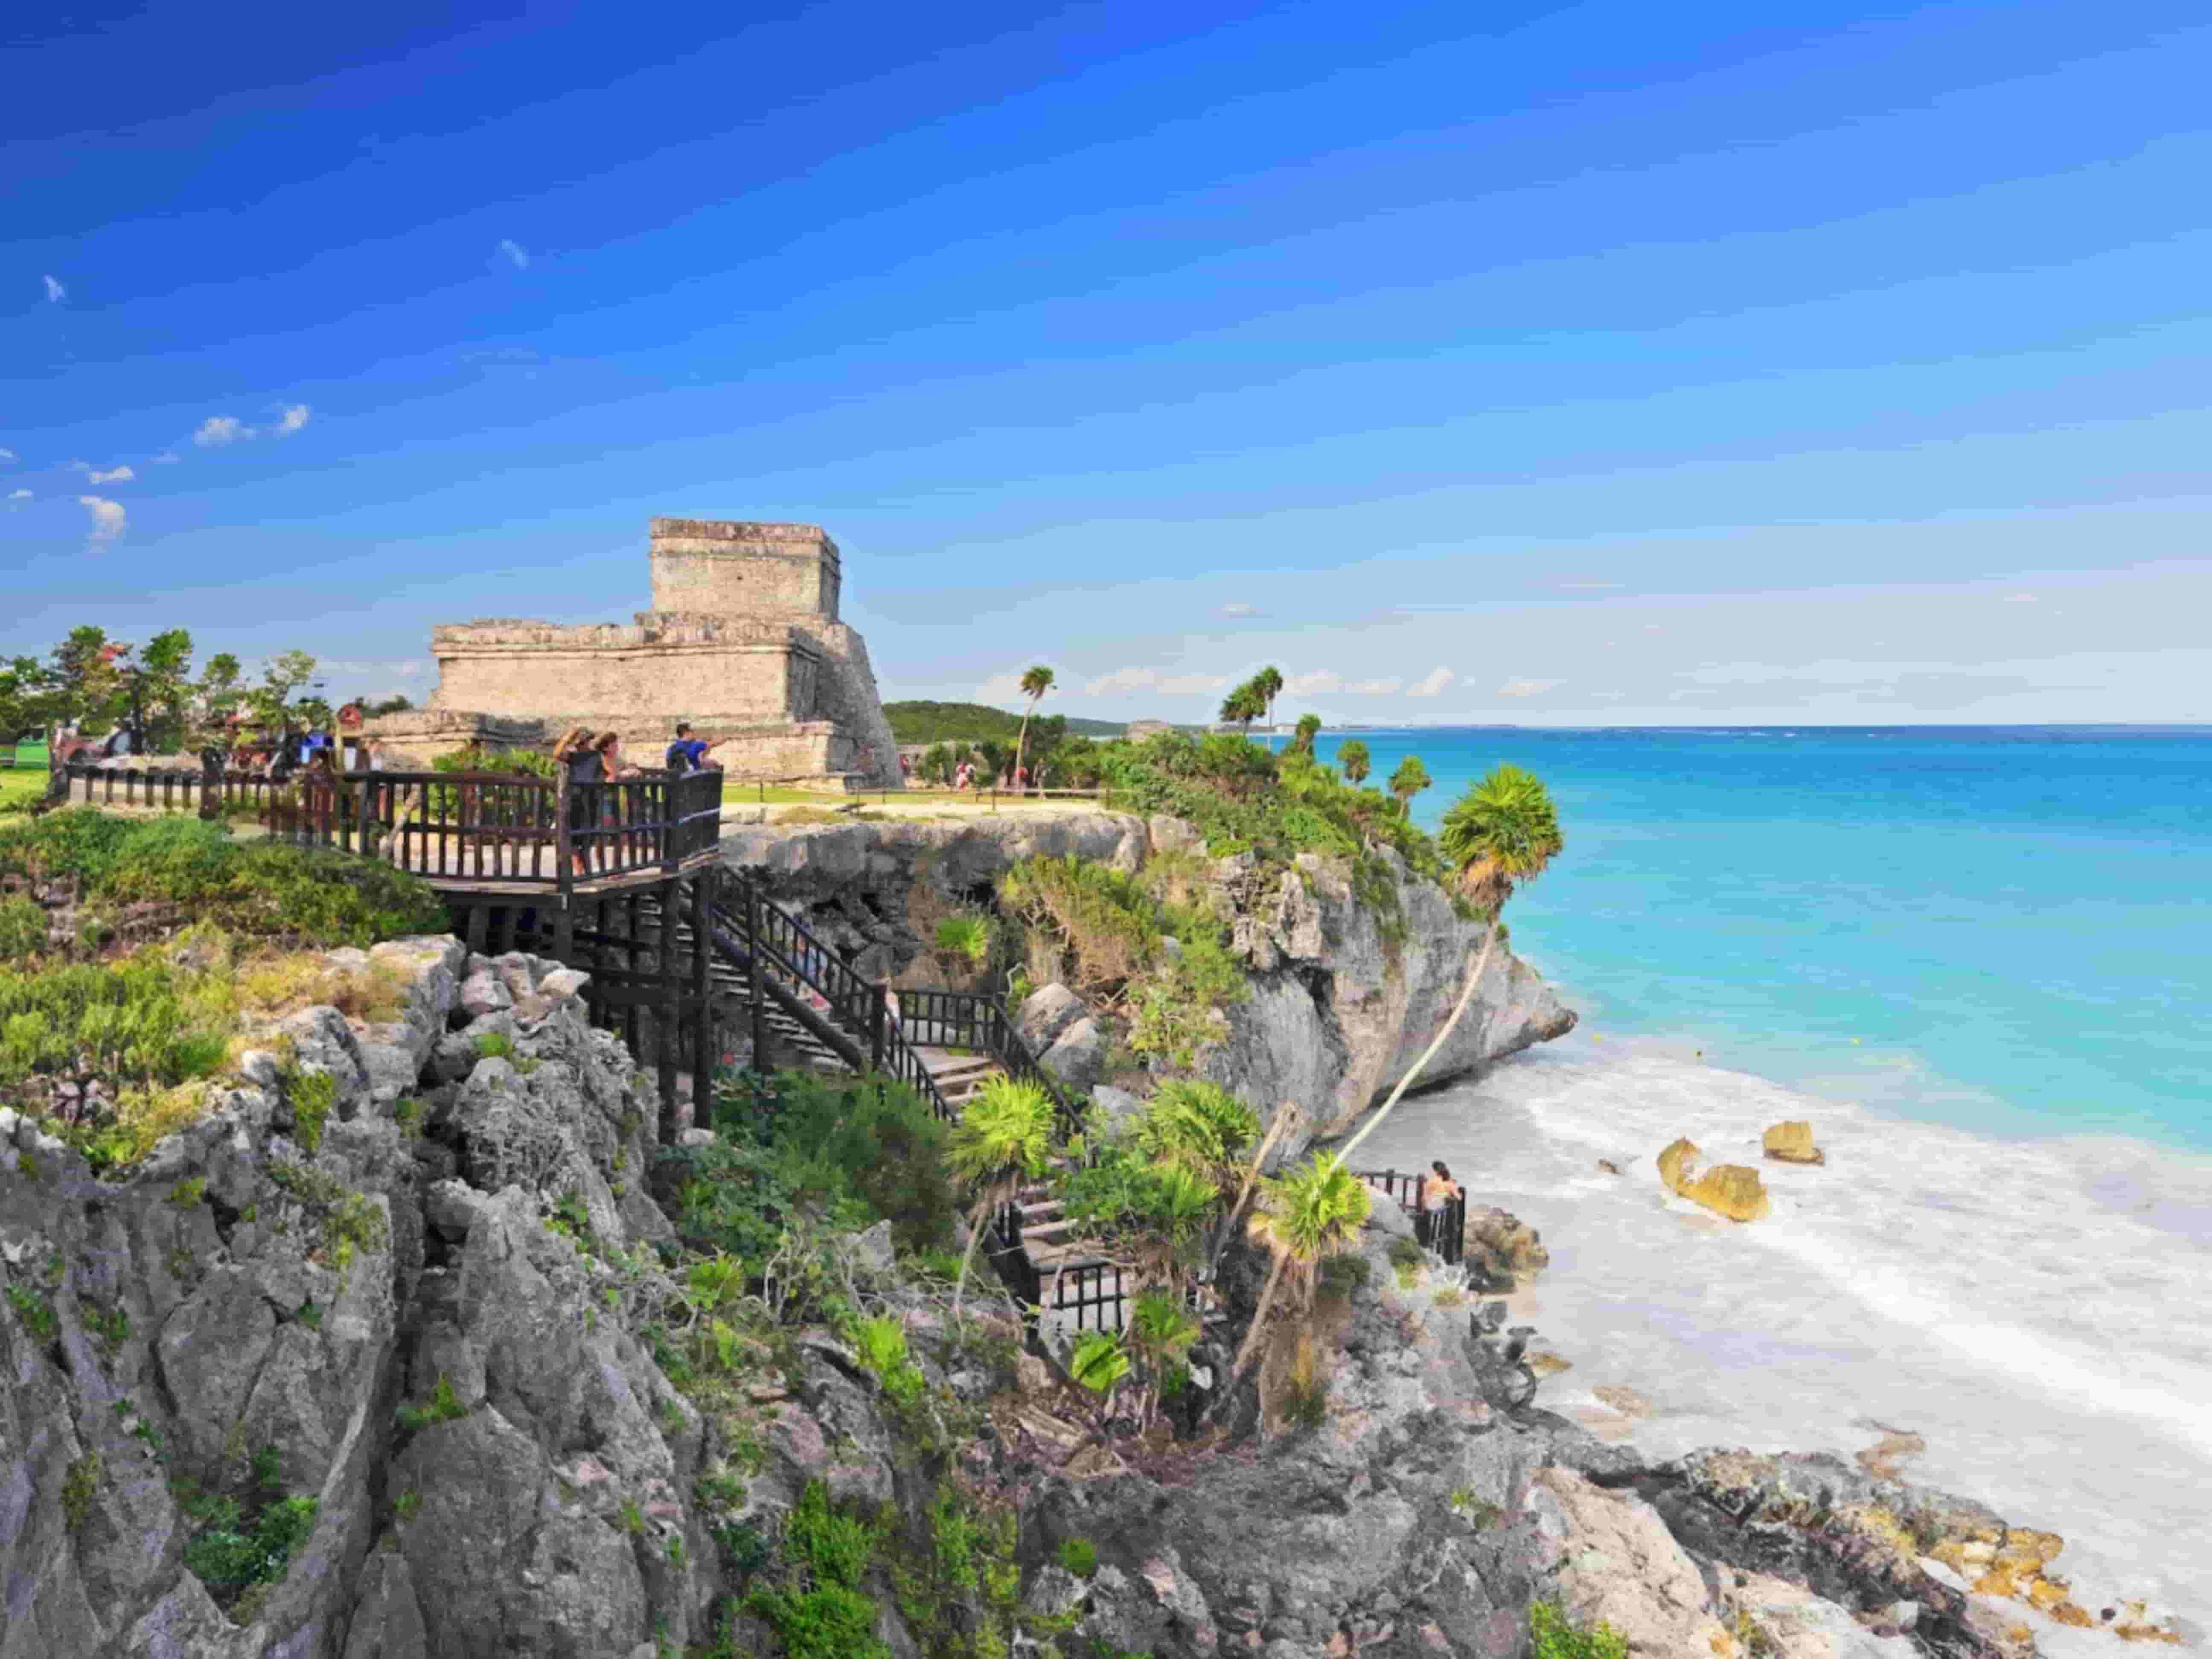 View of the castle and cliff in front of the sea in Tulum archaeological zone.